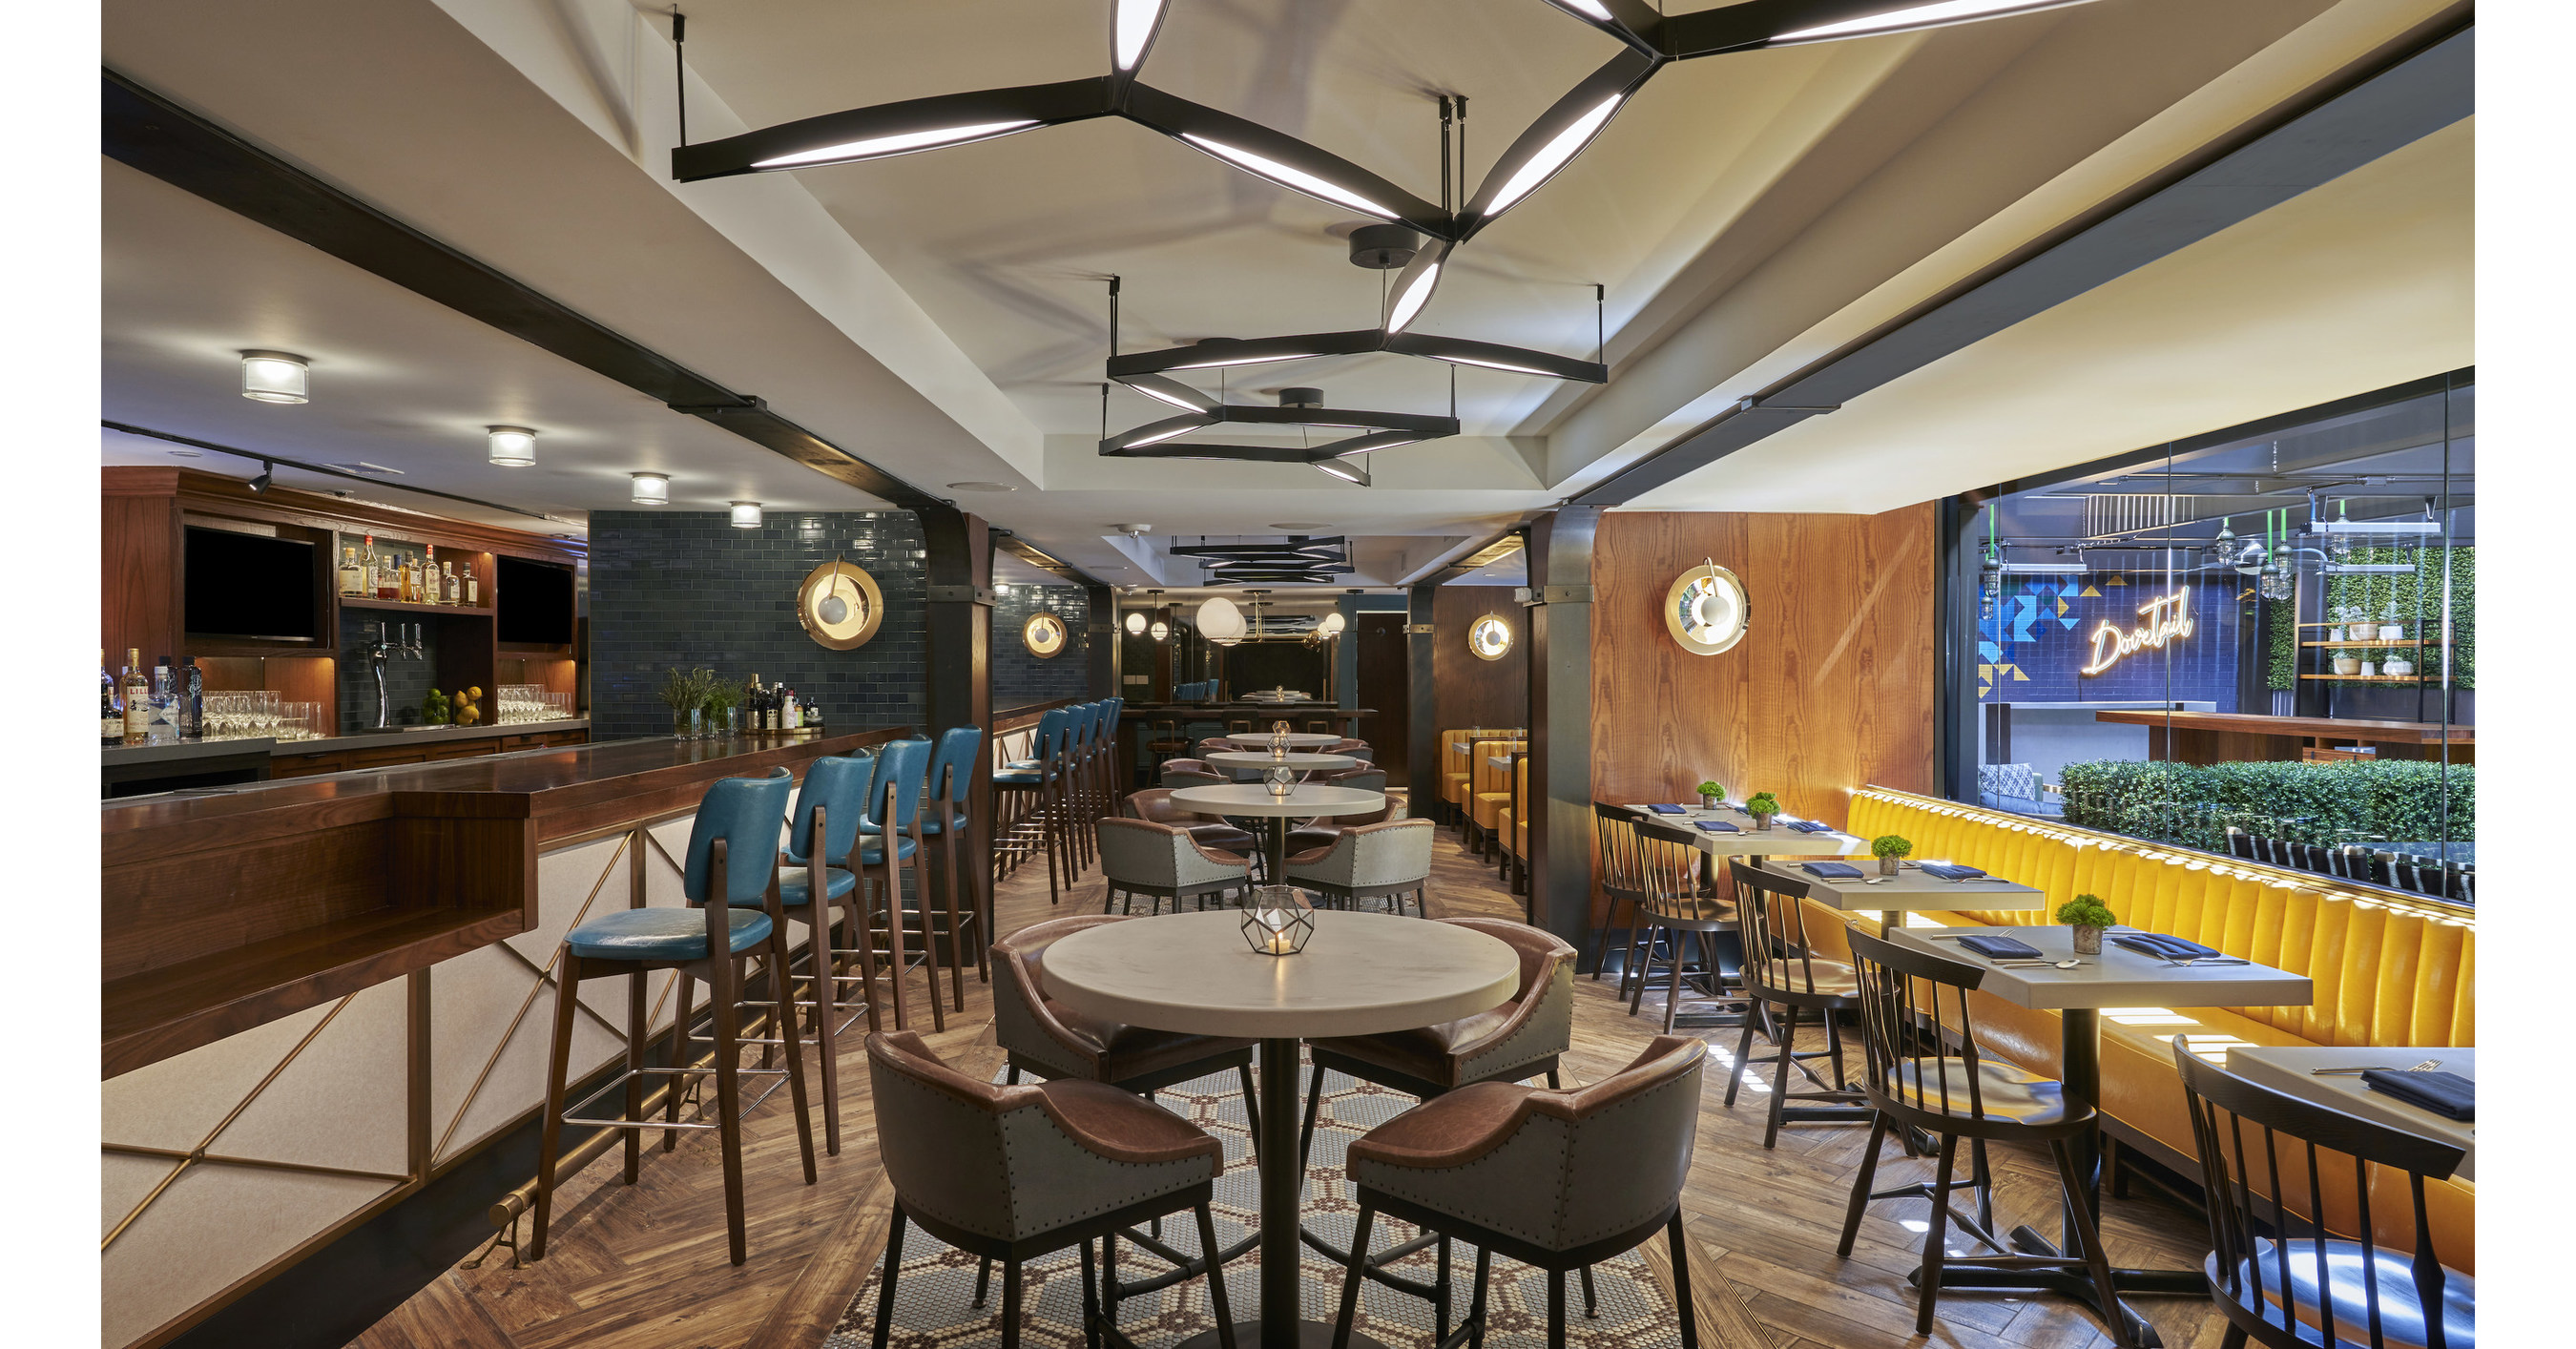 VICEROY WASHINGTON DC FUSES COMMUNITY SPIRIT AND CREATIVE FLAVORS FOR THE DEBUT OF ITS SIGNATURE BAR AND RESTAURANT, DOVETAIL